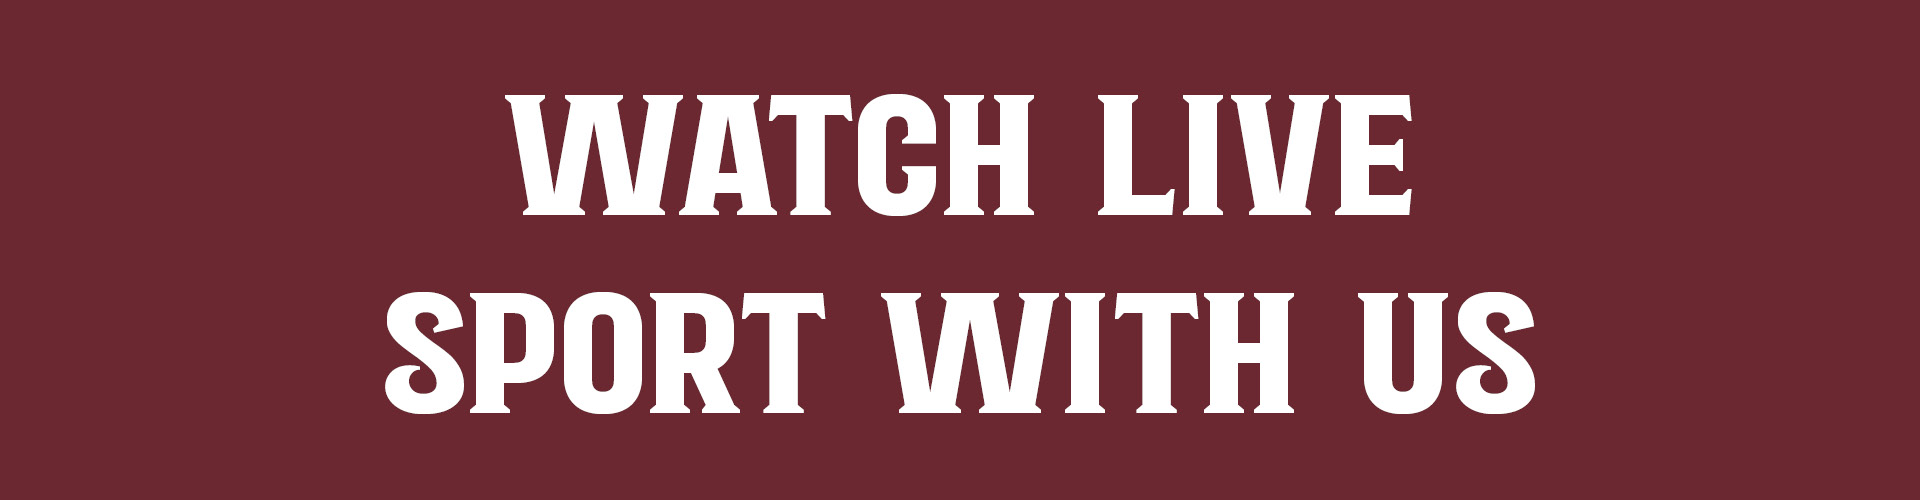 Watch live sport in Cramlington at The Blagdon Arms pub